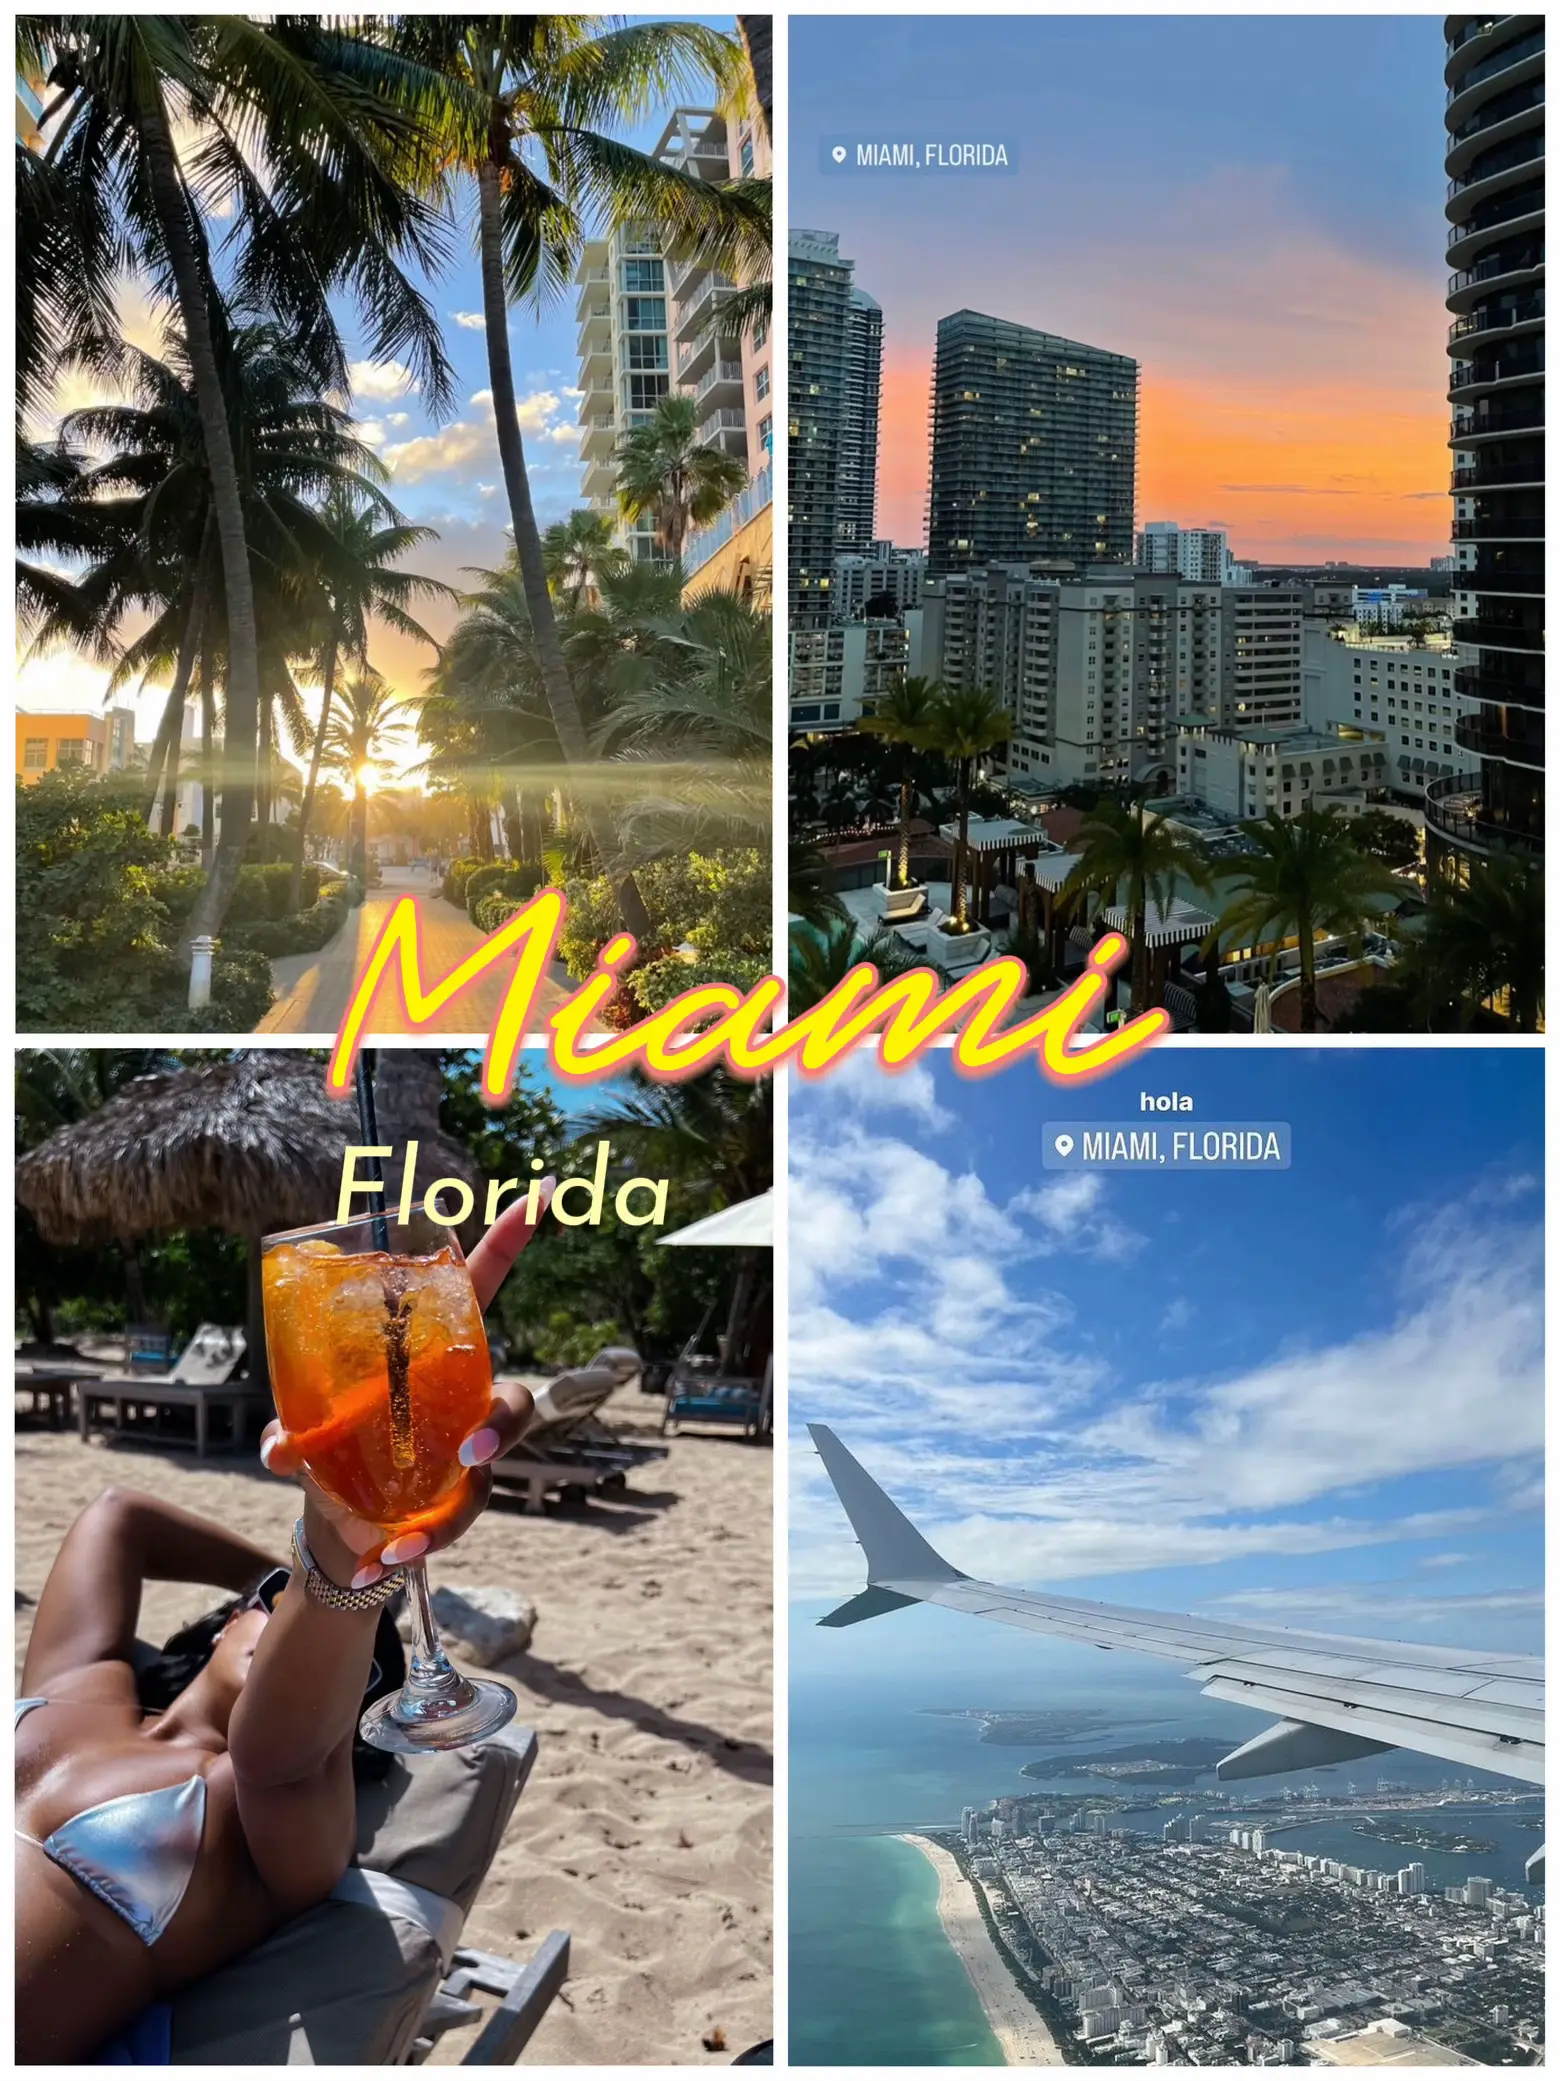 Grateful 💫 Filled with gratitude to be here in Miami connecting with our  community in the Sunshine State! Come visit our newest Alo S